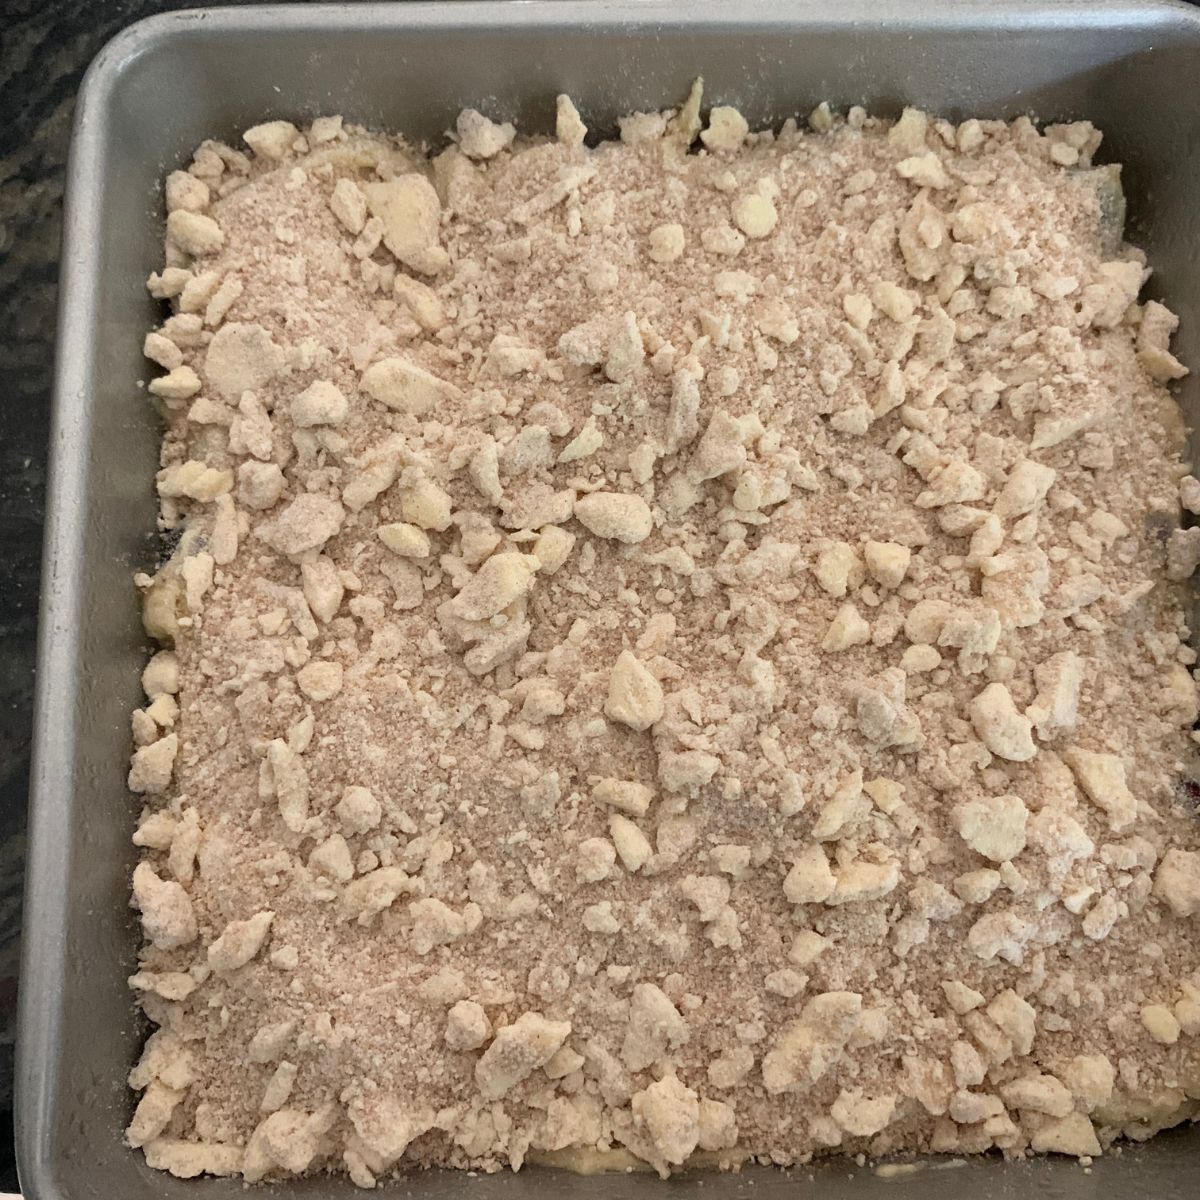 The coffee cake in the pan, ready to bake.